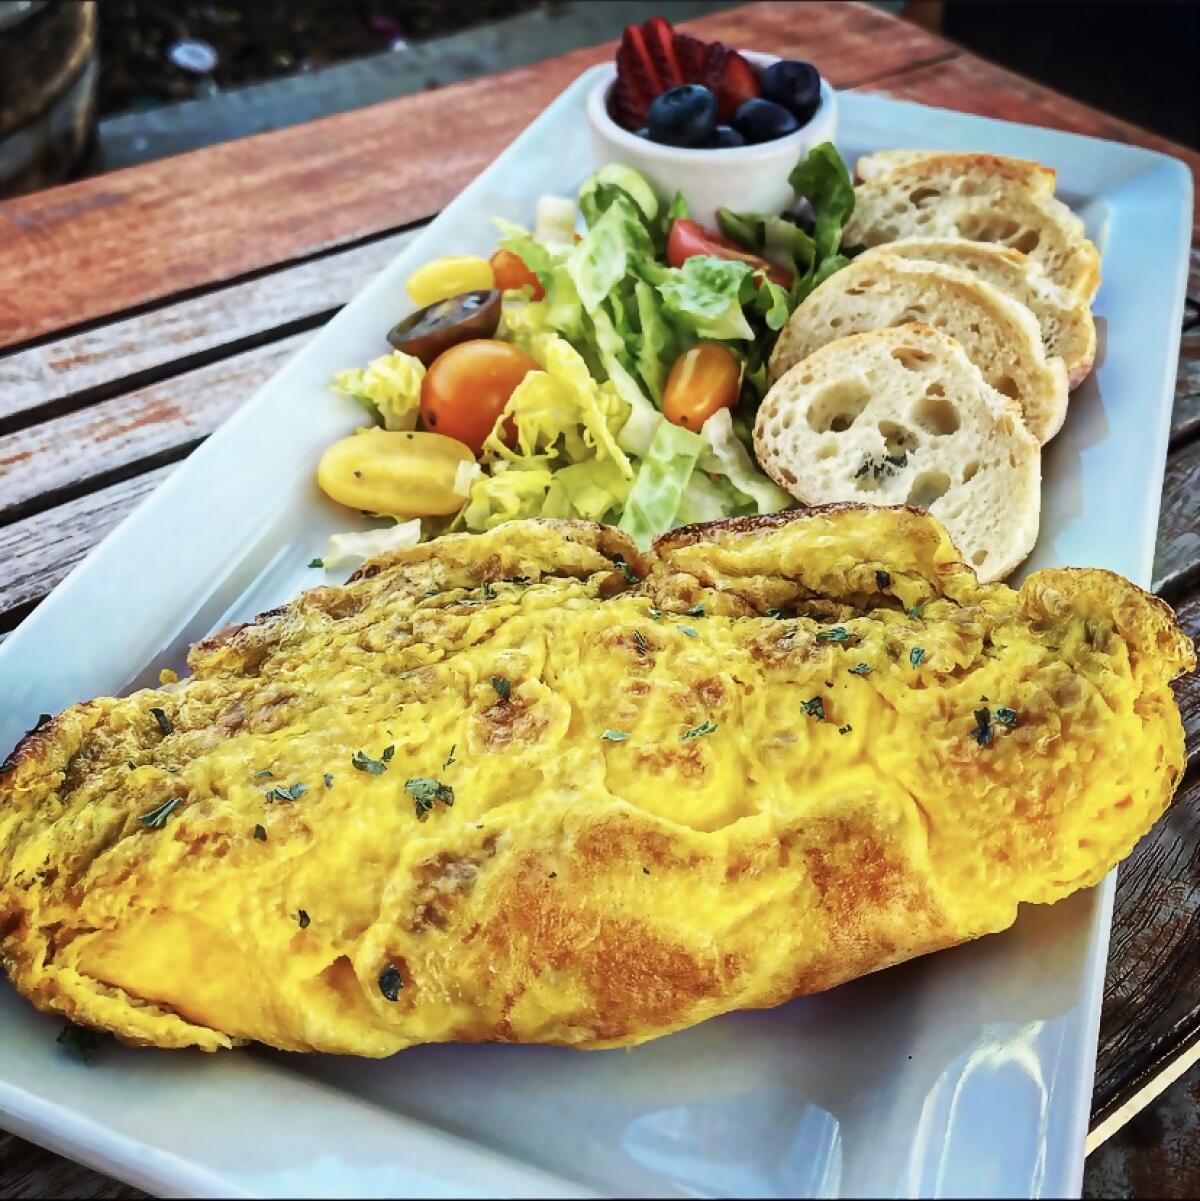 An omelet like those of the Brittany region of France at Delice Breton in San Juan Capistrano. 